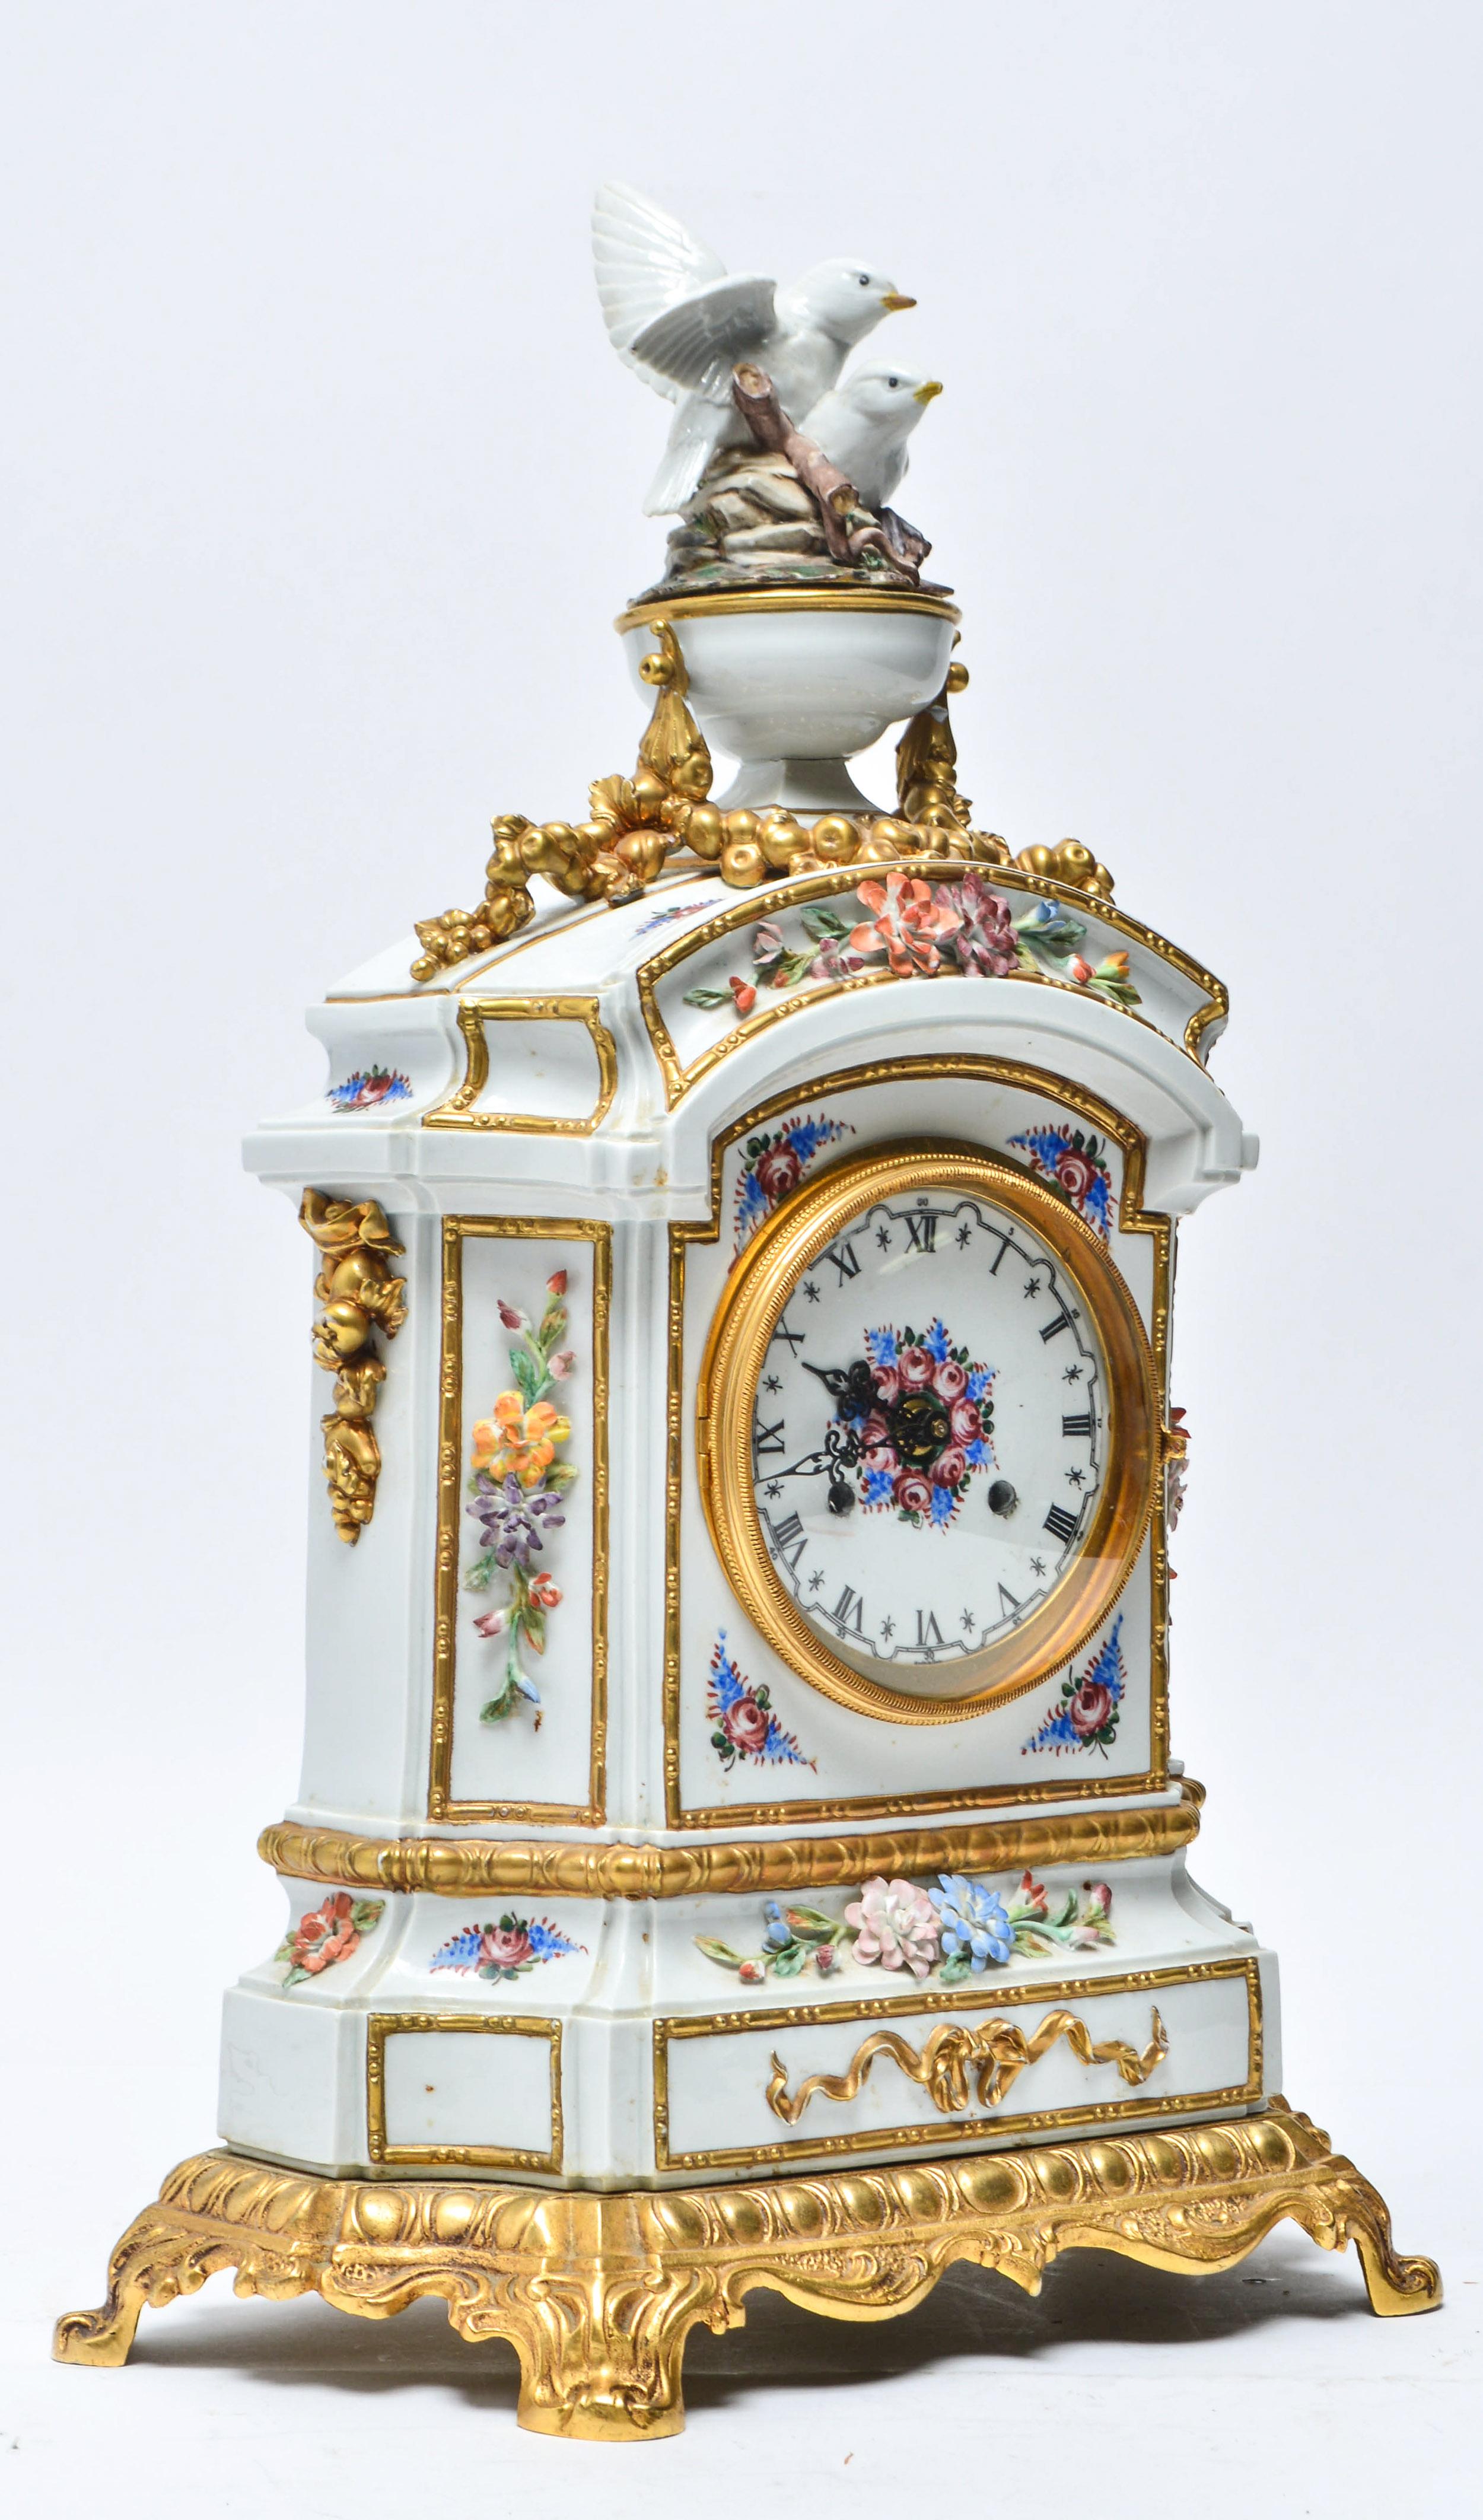 French Carpie hand painted mantel clock with gilt-trim porcelain and mounted on a fitted shaped brass base. The piece has a finial of decorative doves and applied flowers. The dial has black Roman numerals. Marked: 